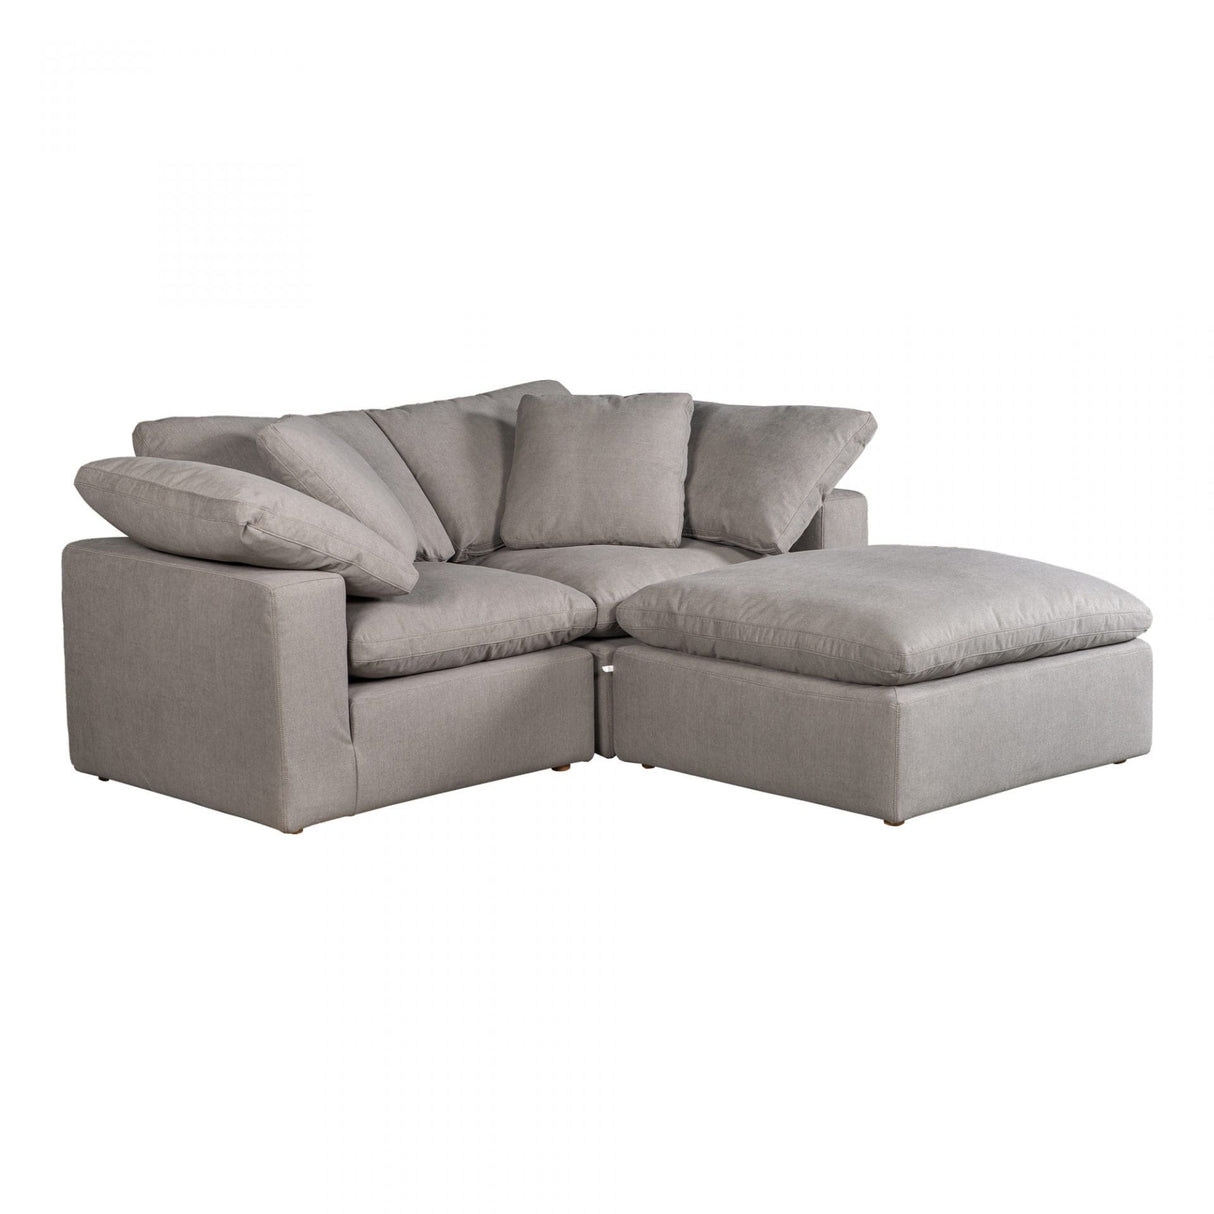 BLU Home Clay Nook Sectional in LiveSmart Fabric Furniture moes-YJ-1009-29 840026417839